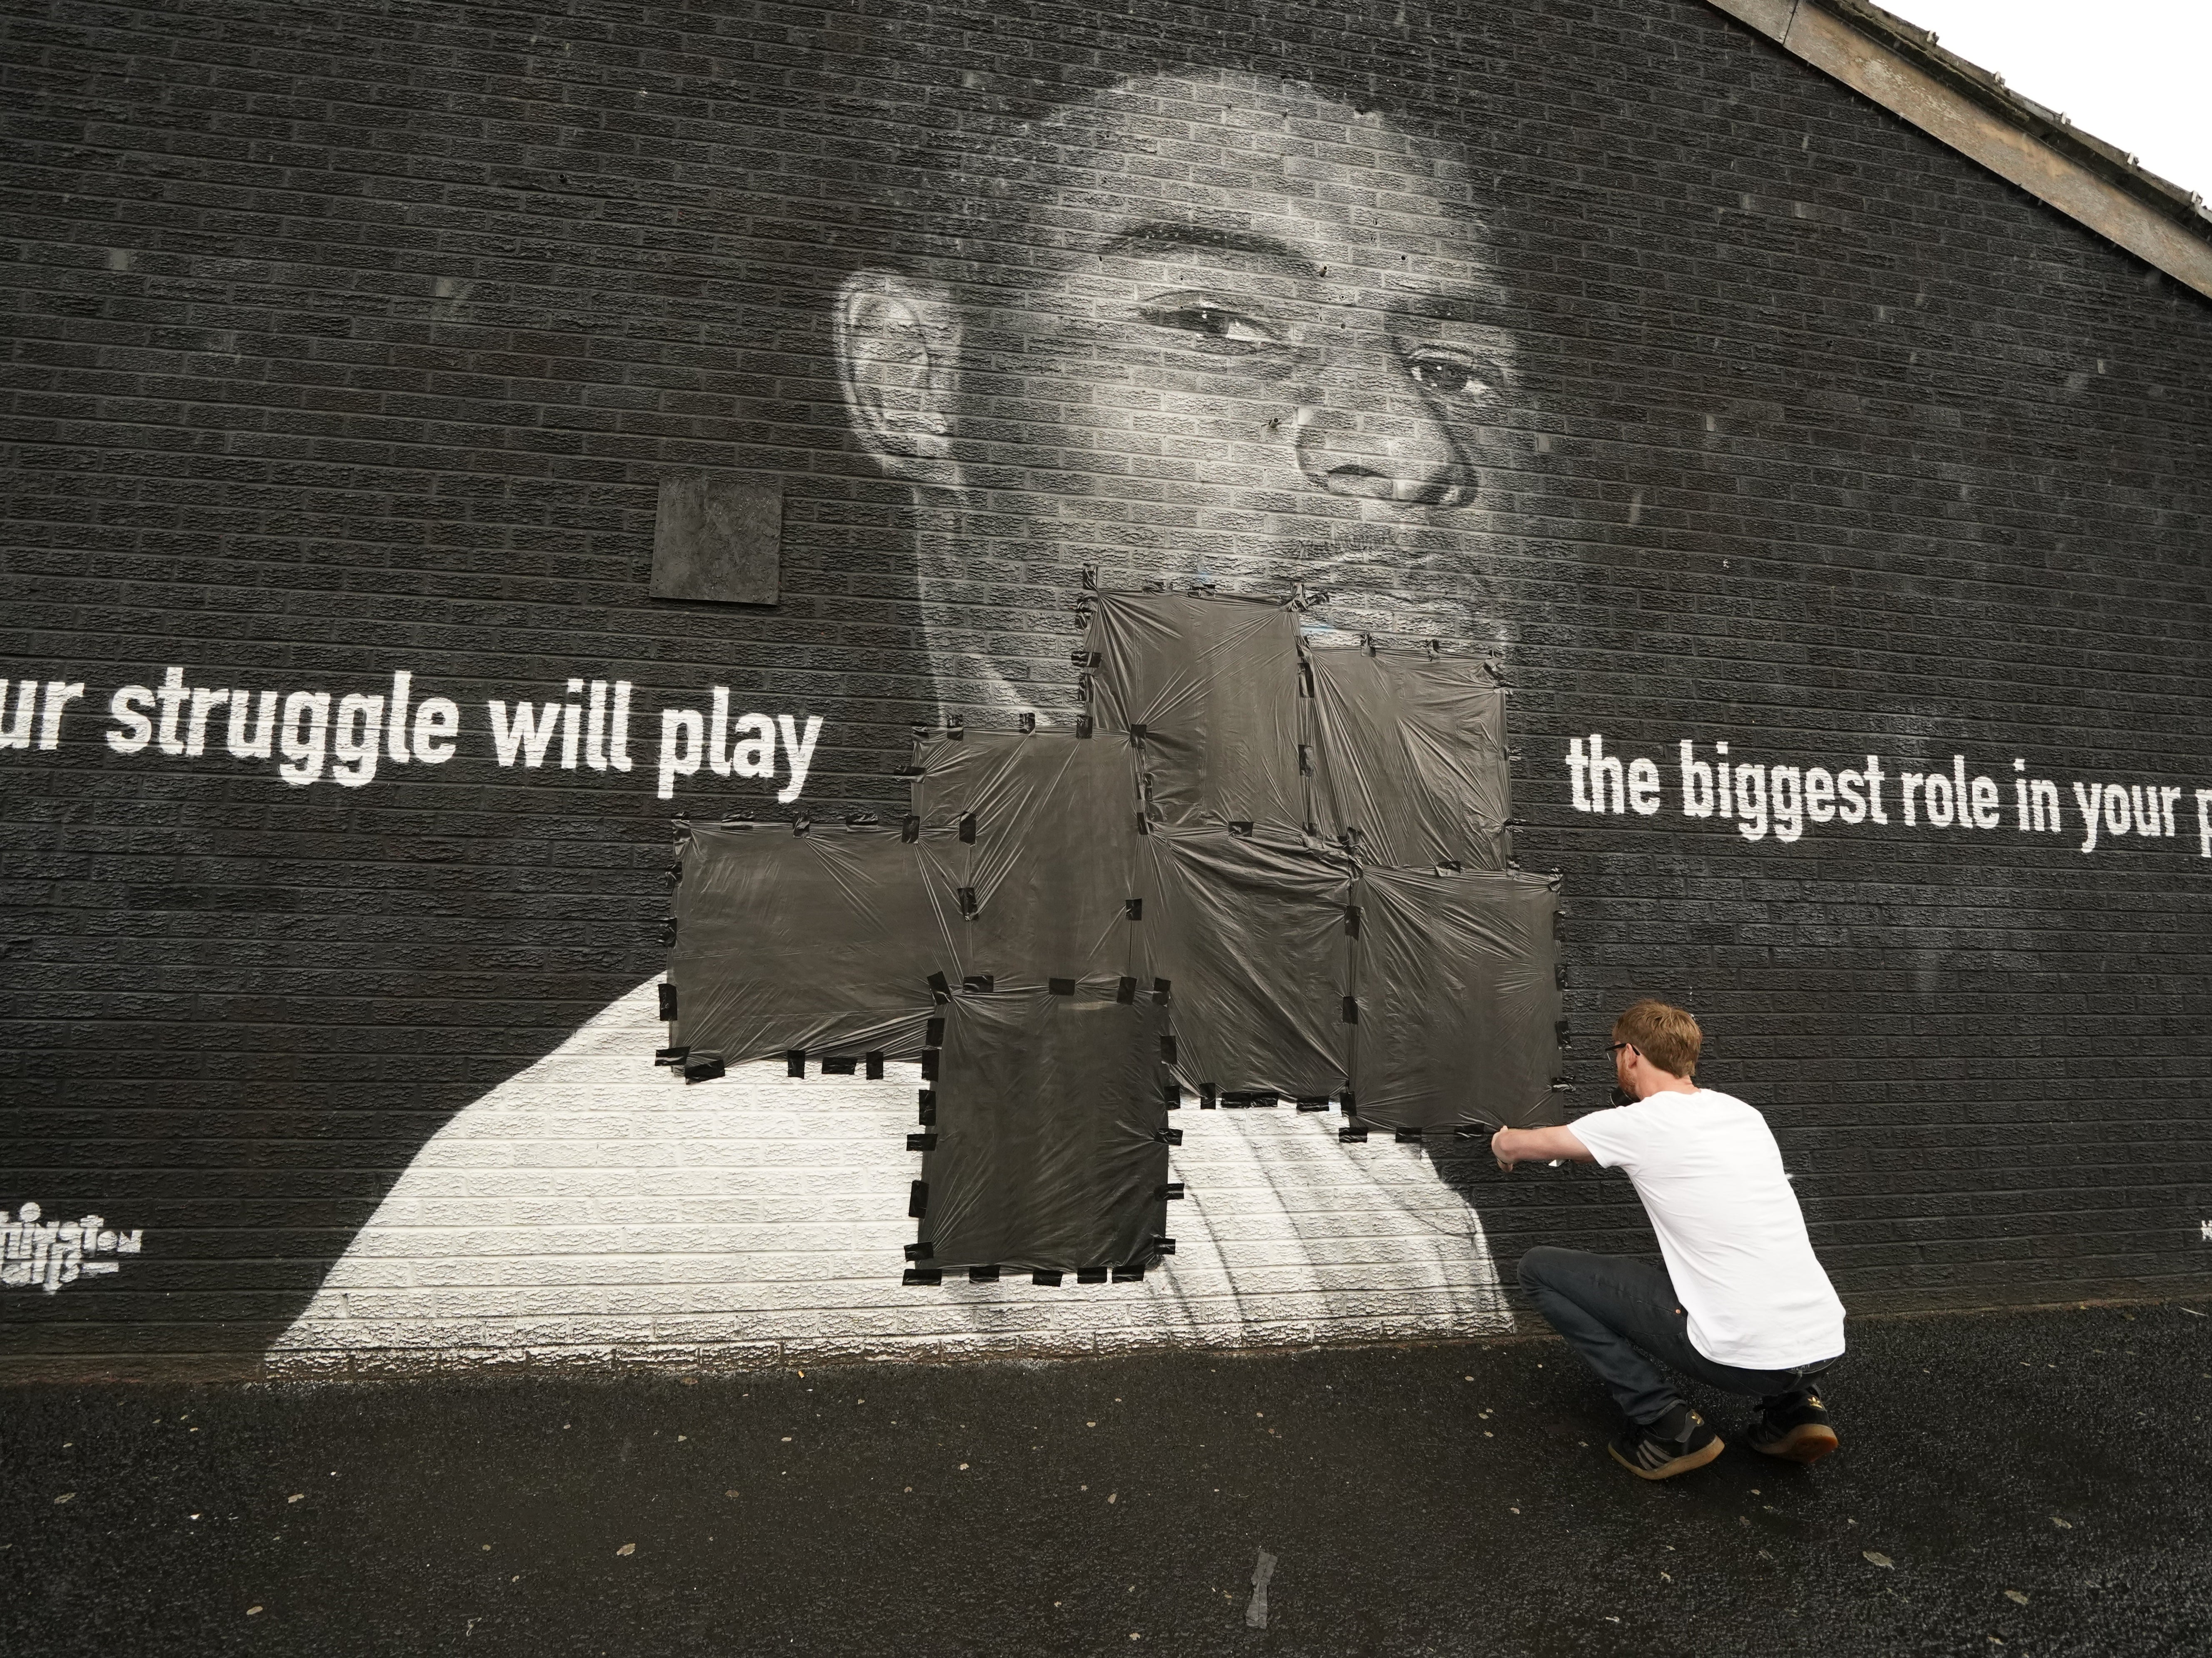 Local resident Ed Wellard tapes bin liners over graffiti on the mural of Marcus Rashford in Copson Street, Withington.